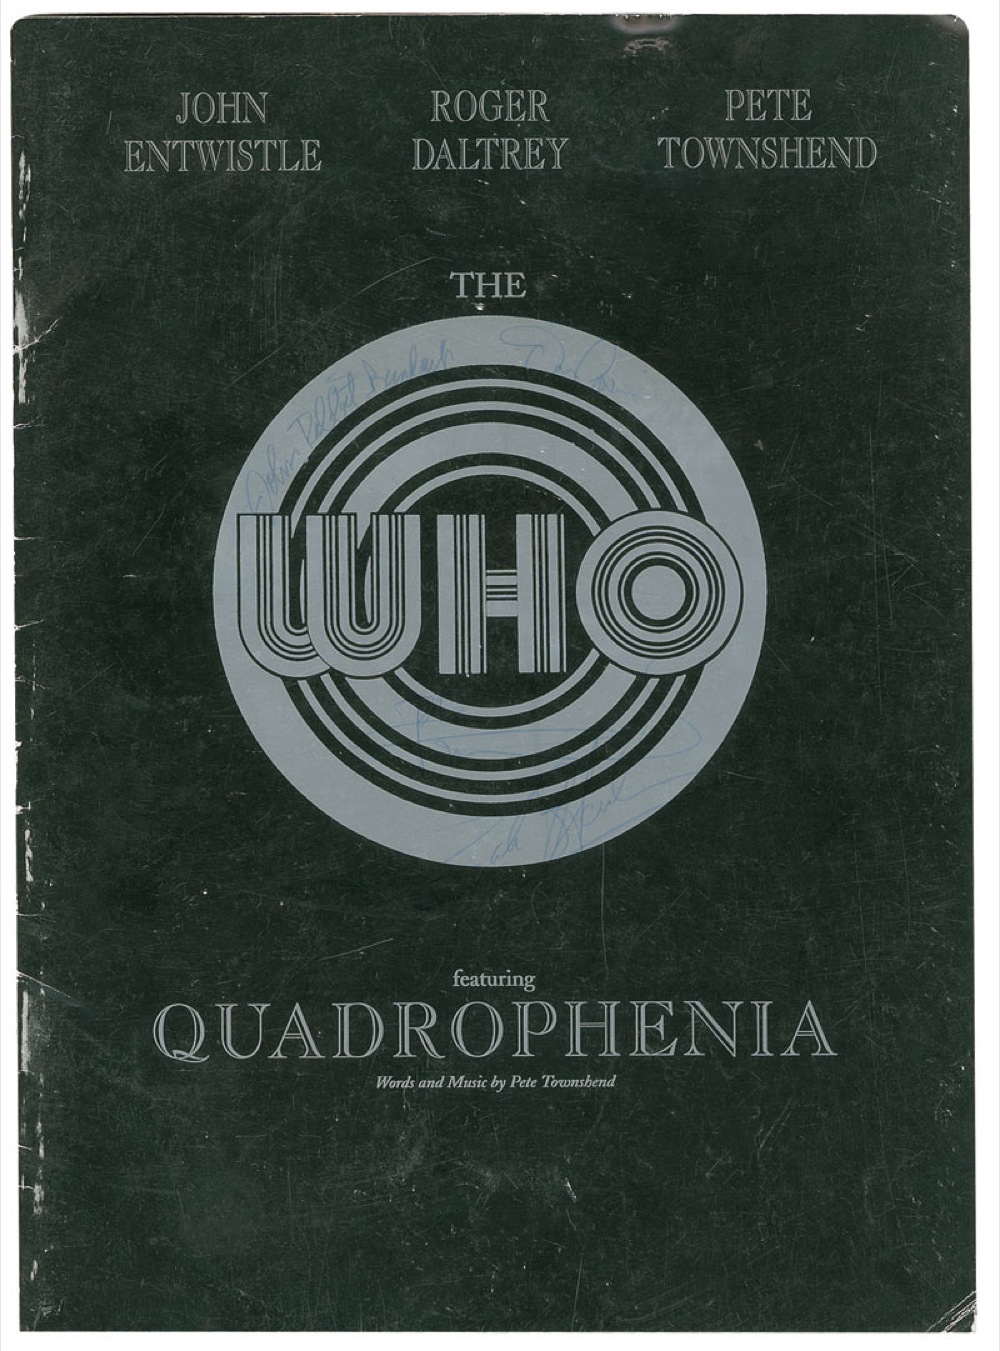 Lot #925 The Who